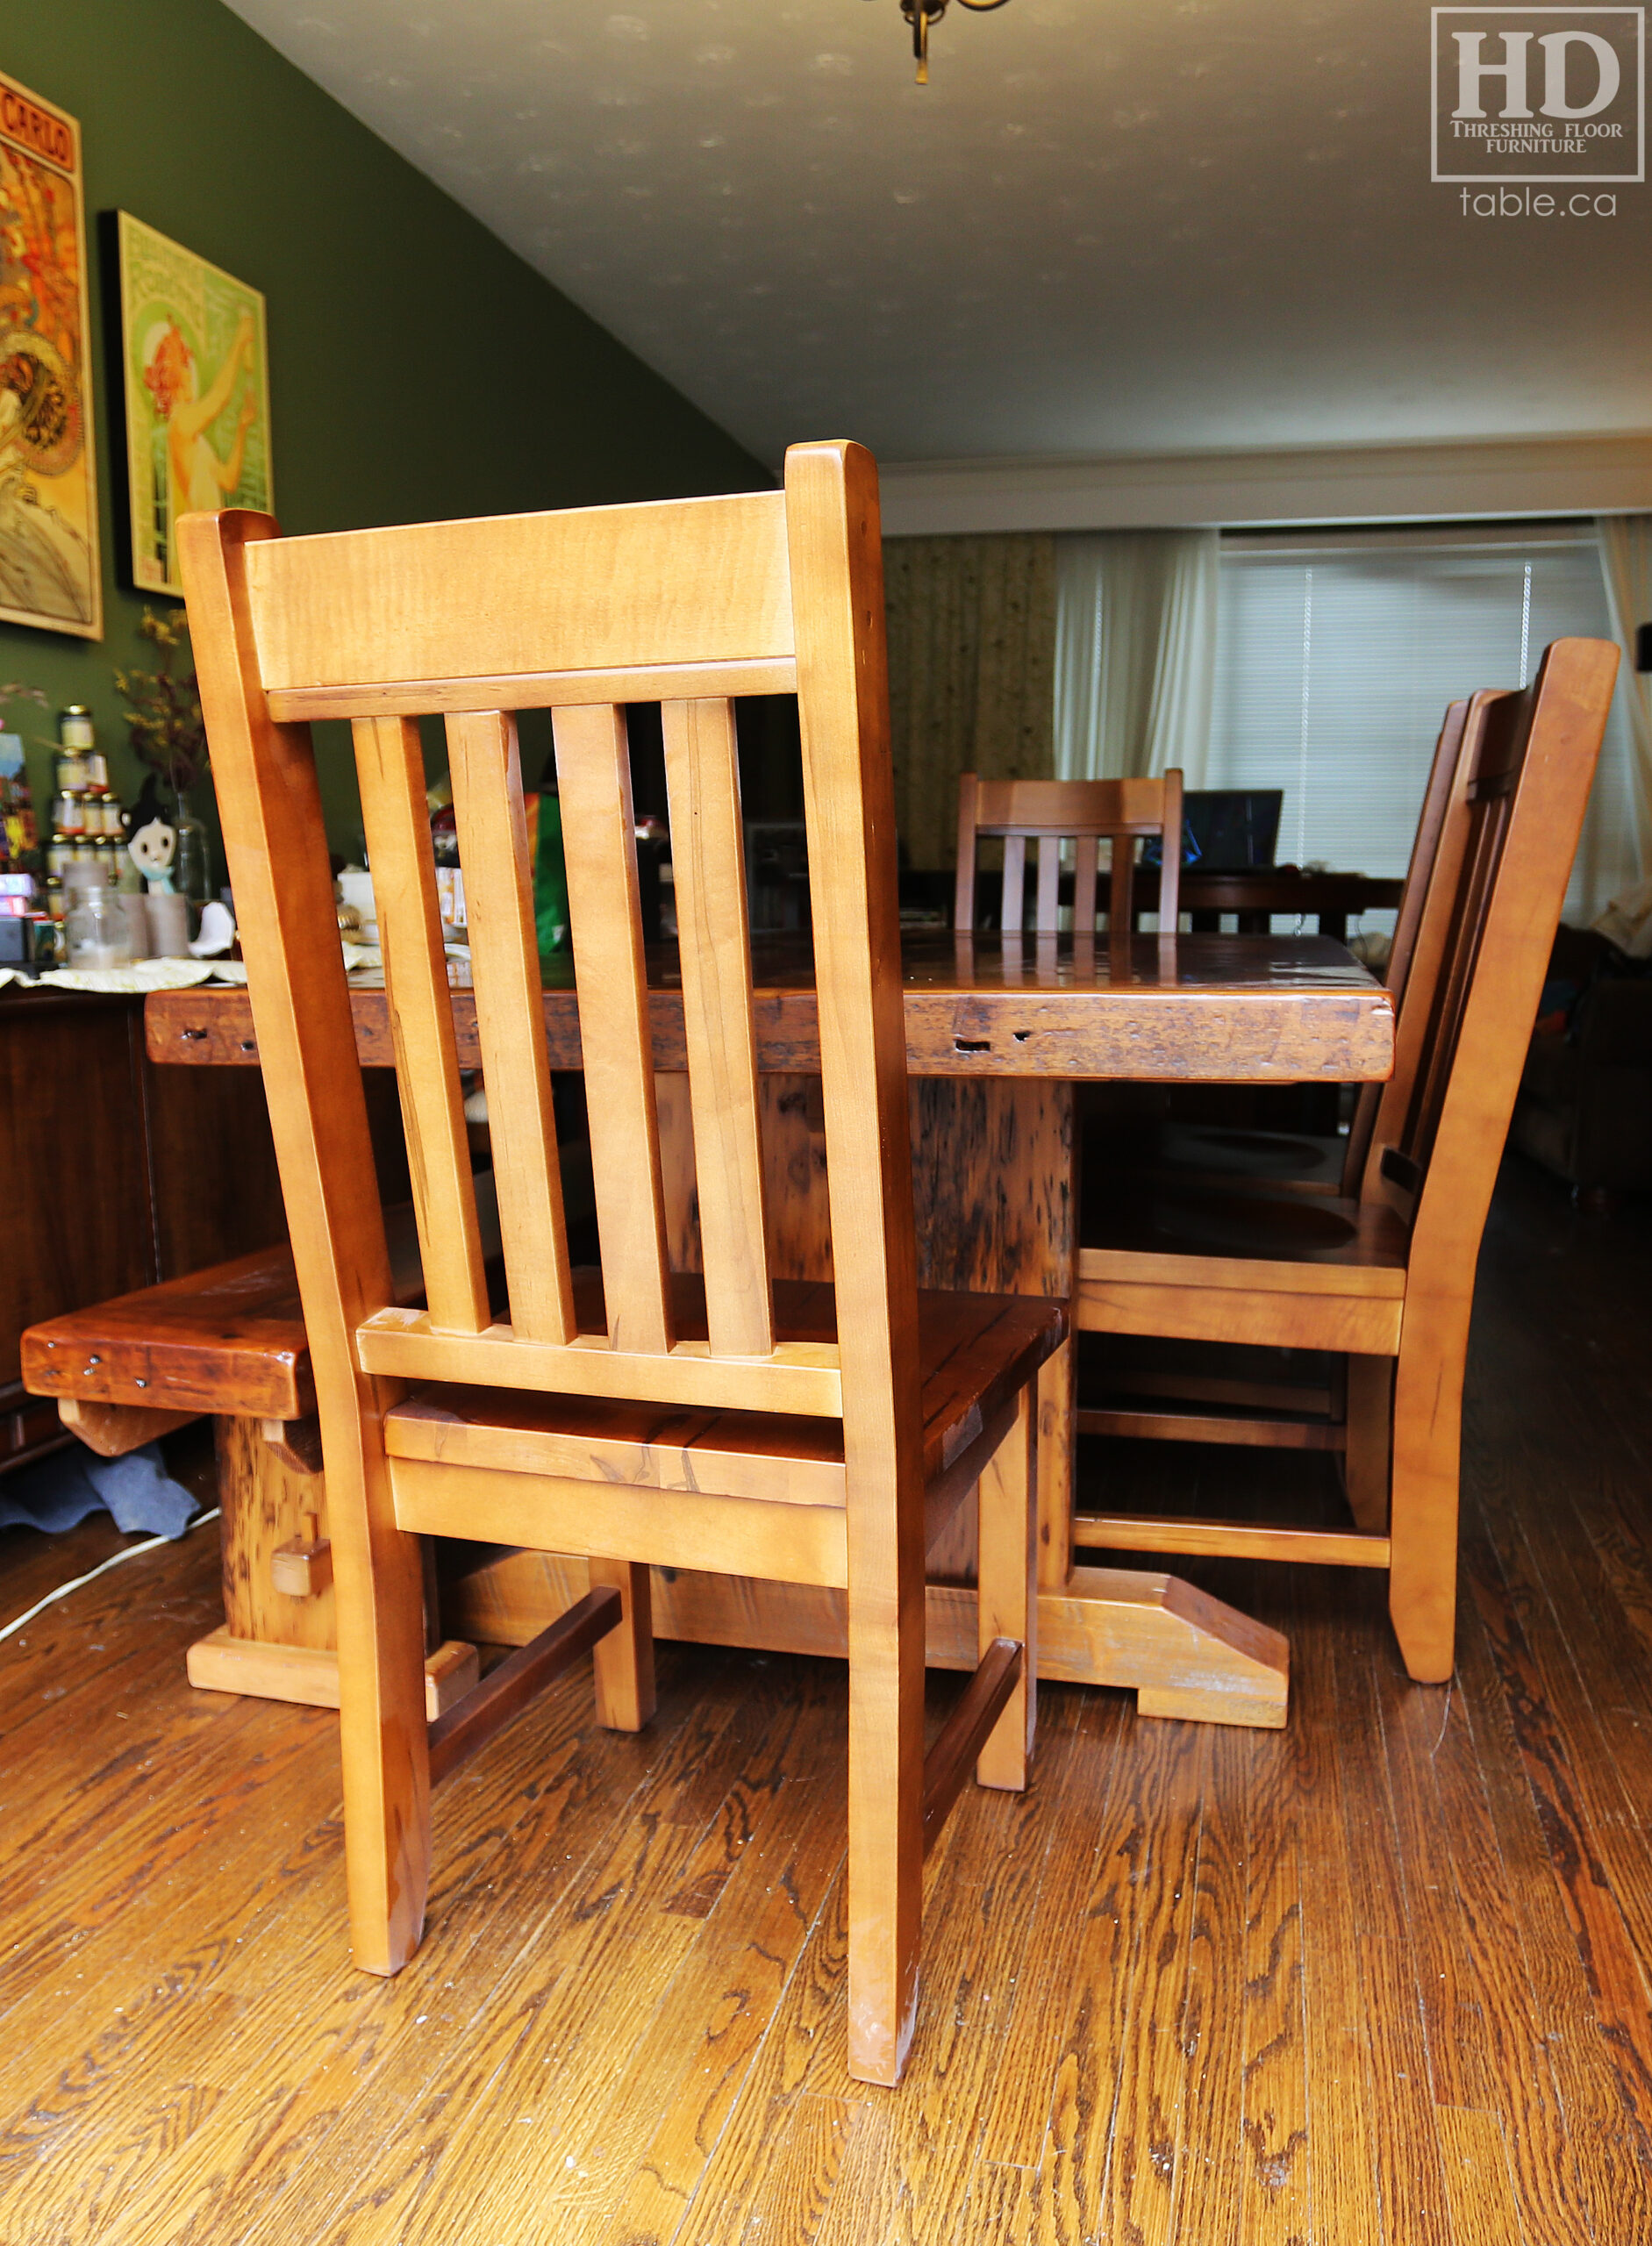 Reclaimed Wood Table with Extra Thick 3" Top by HD Threshing Floor Furniture / www.table.ca